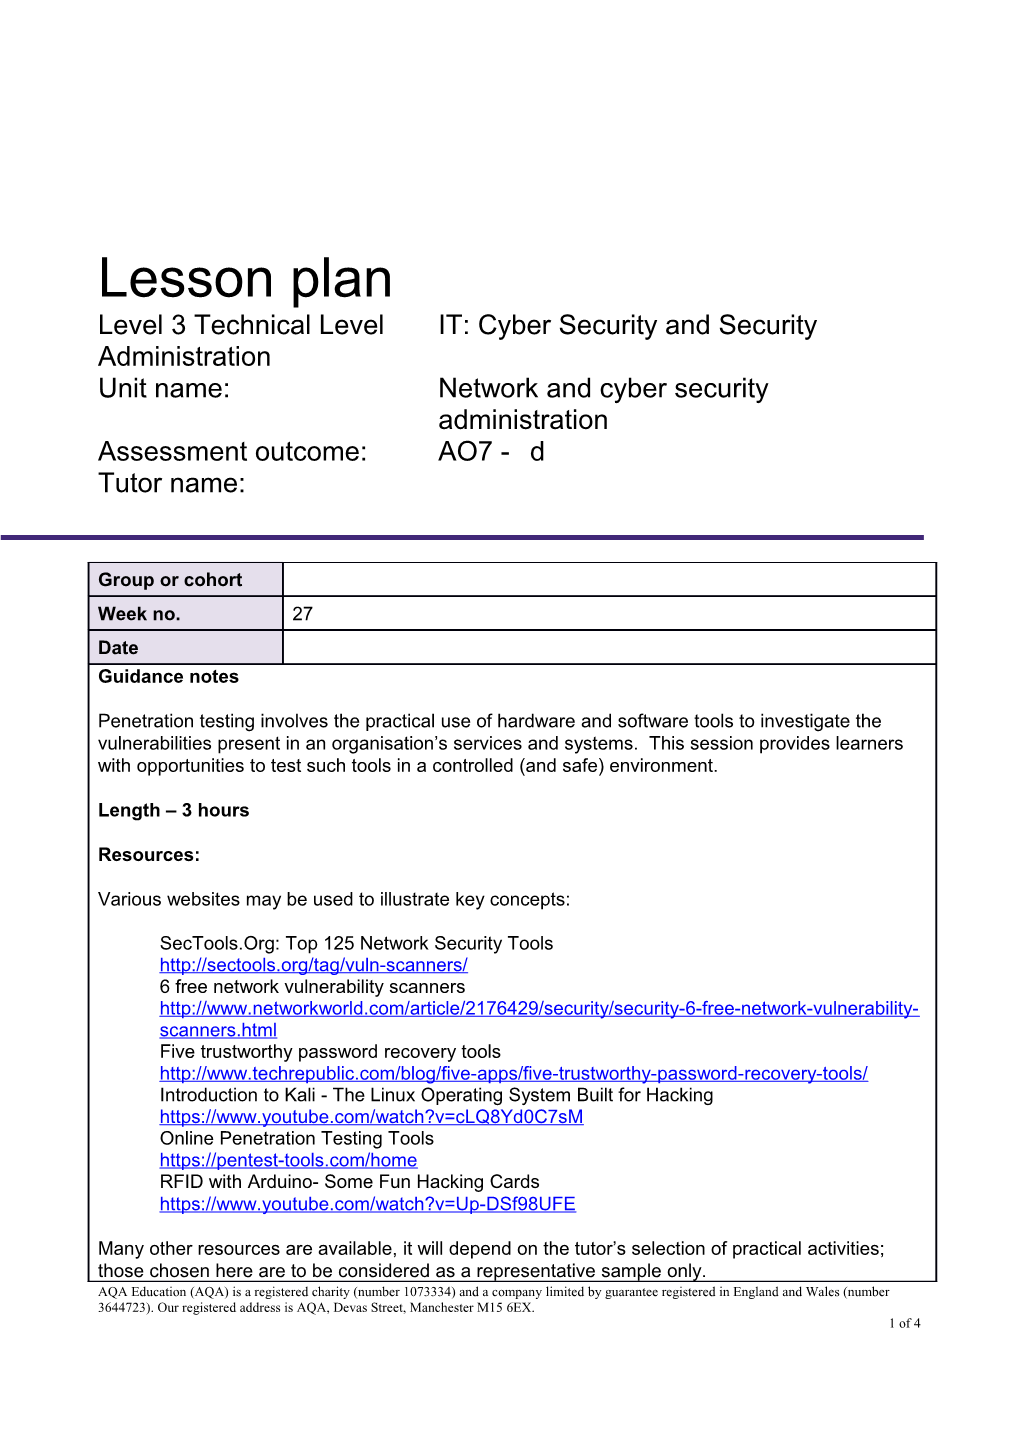 Level 3 Technical Level IT: Cyber Security and Security Administration